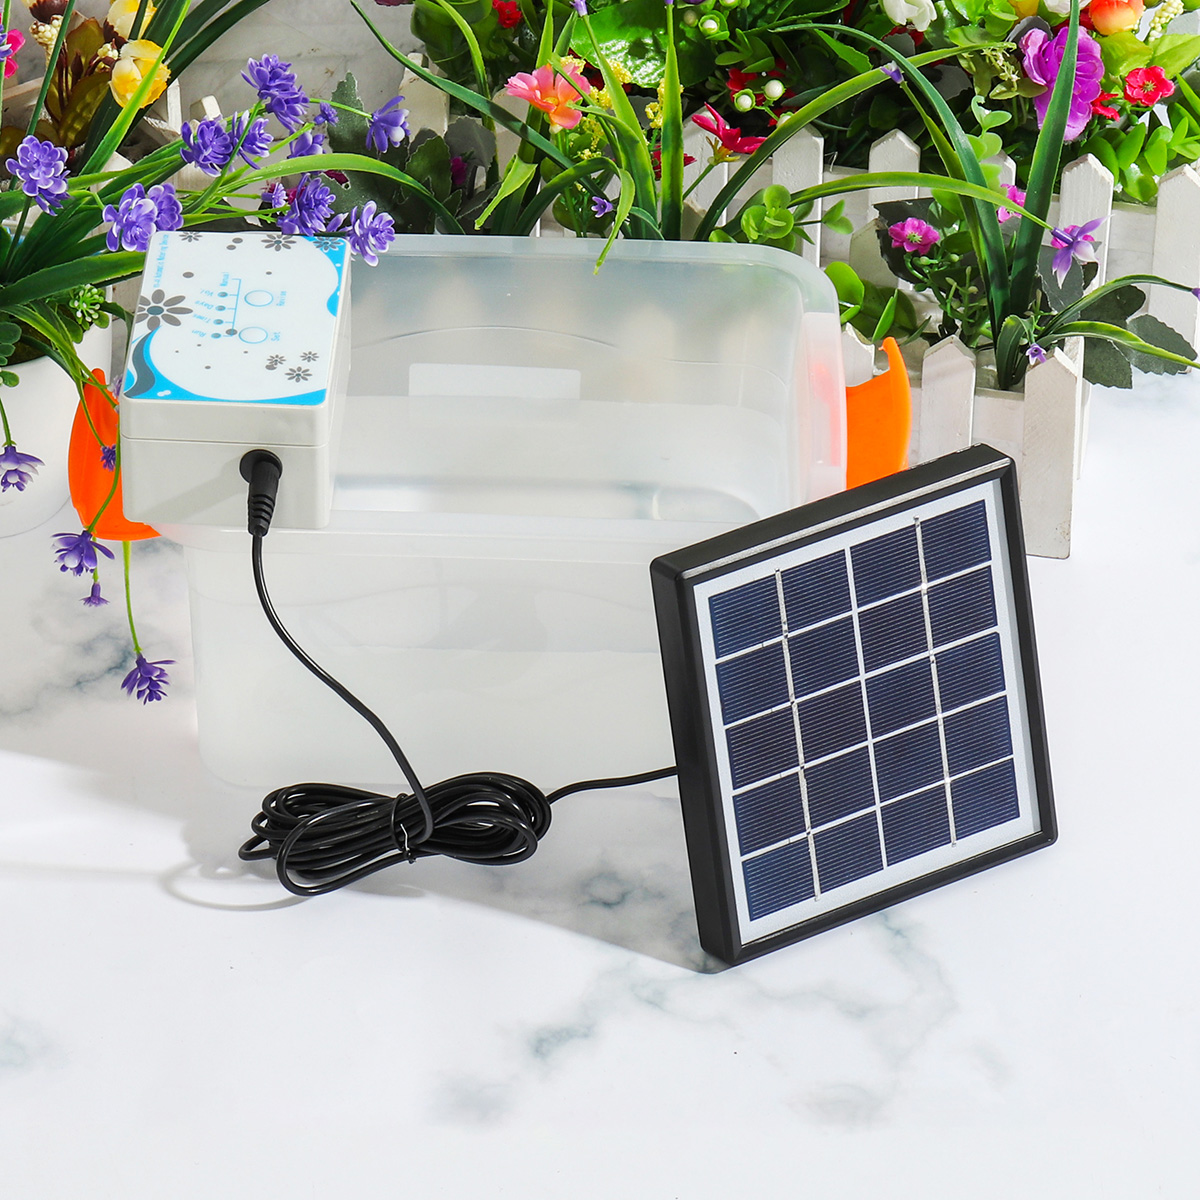 Solar-DIY-Micro-Automatic-Drip-Irrigation-Kit-Self-Watering-USB-Charged-Timer-1449263-9